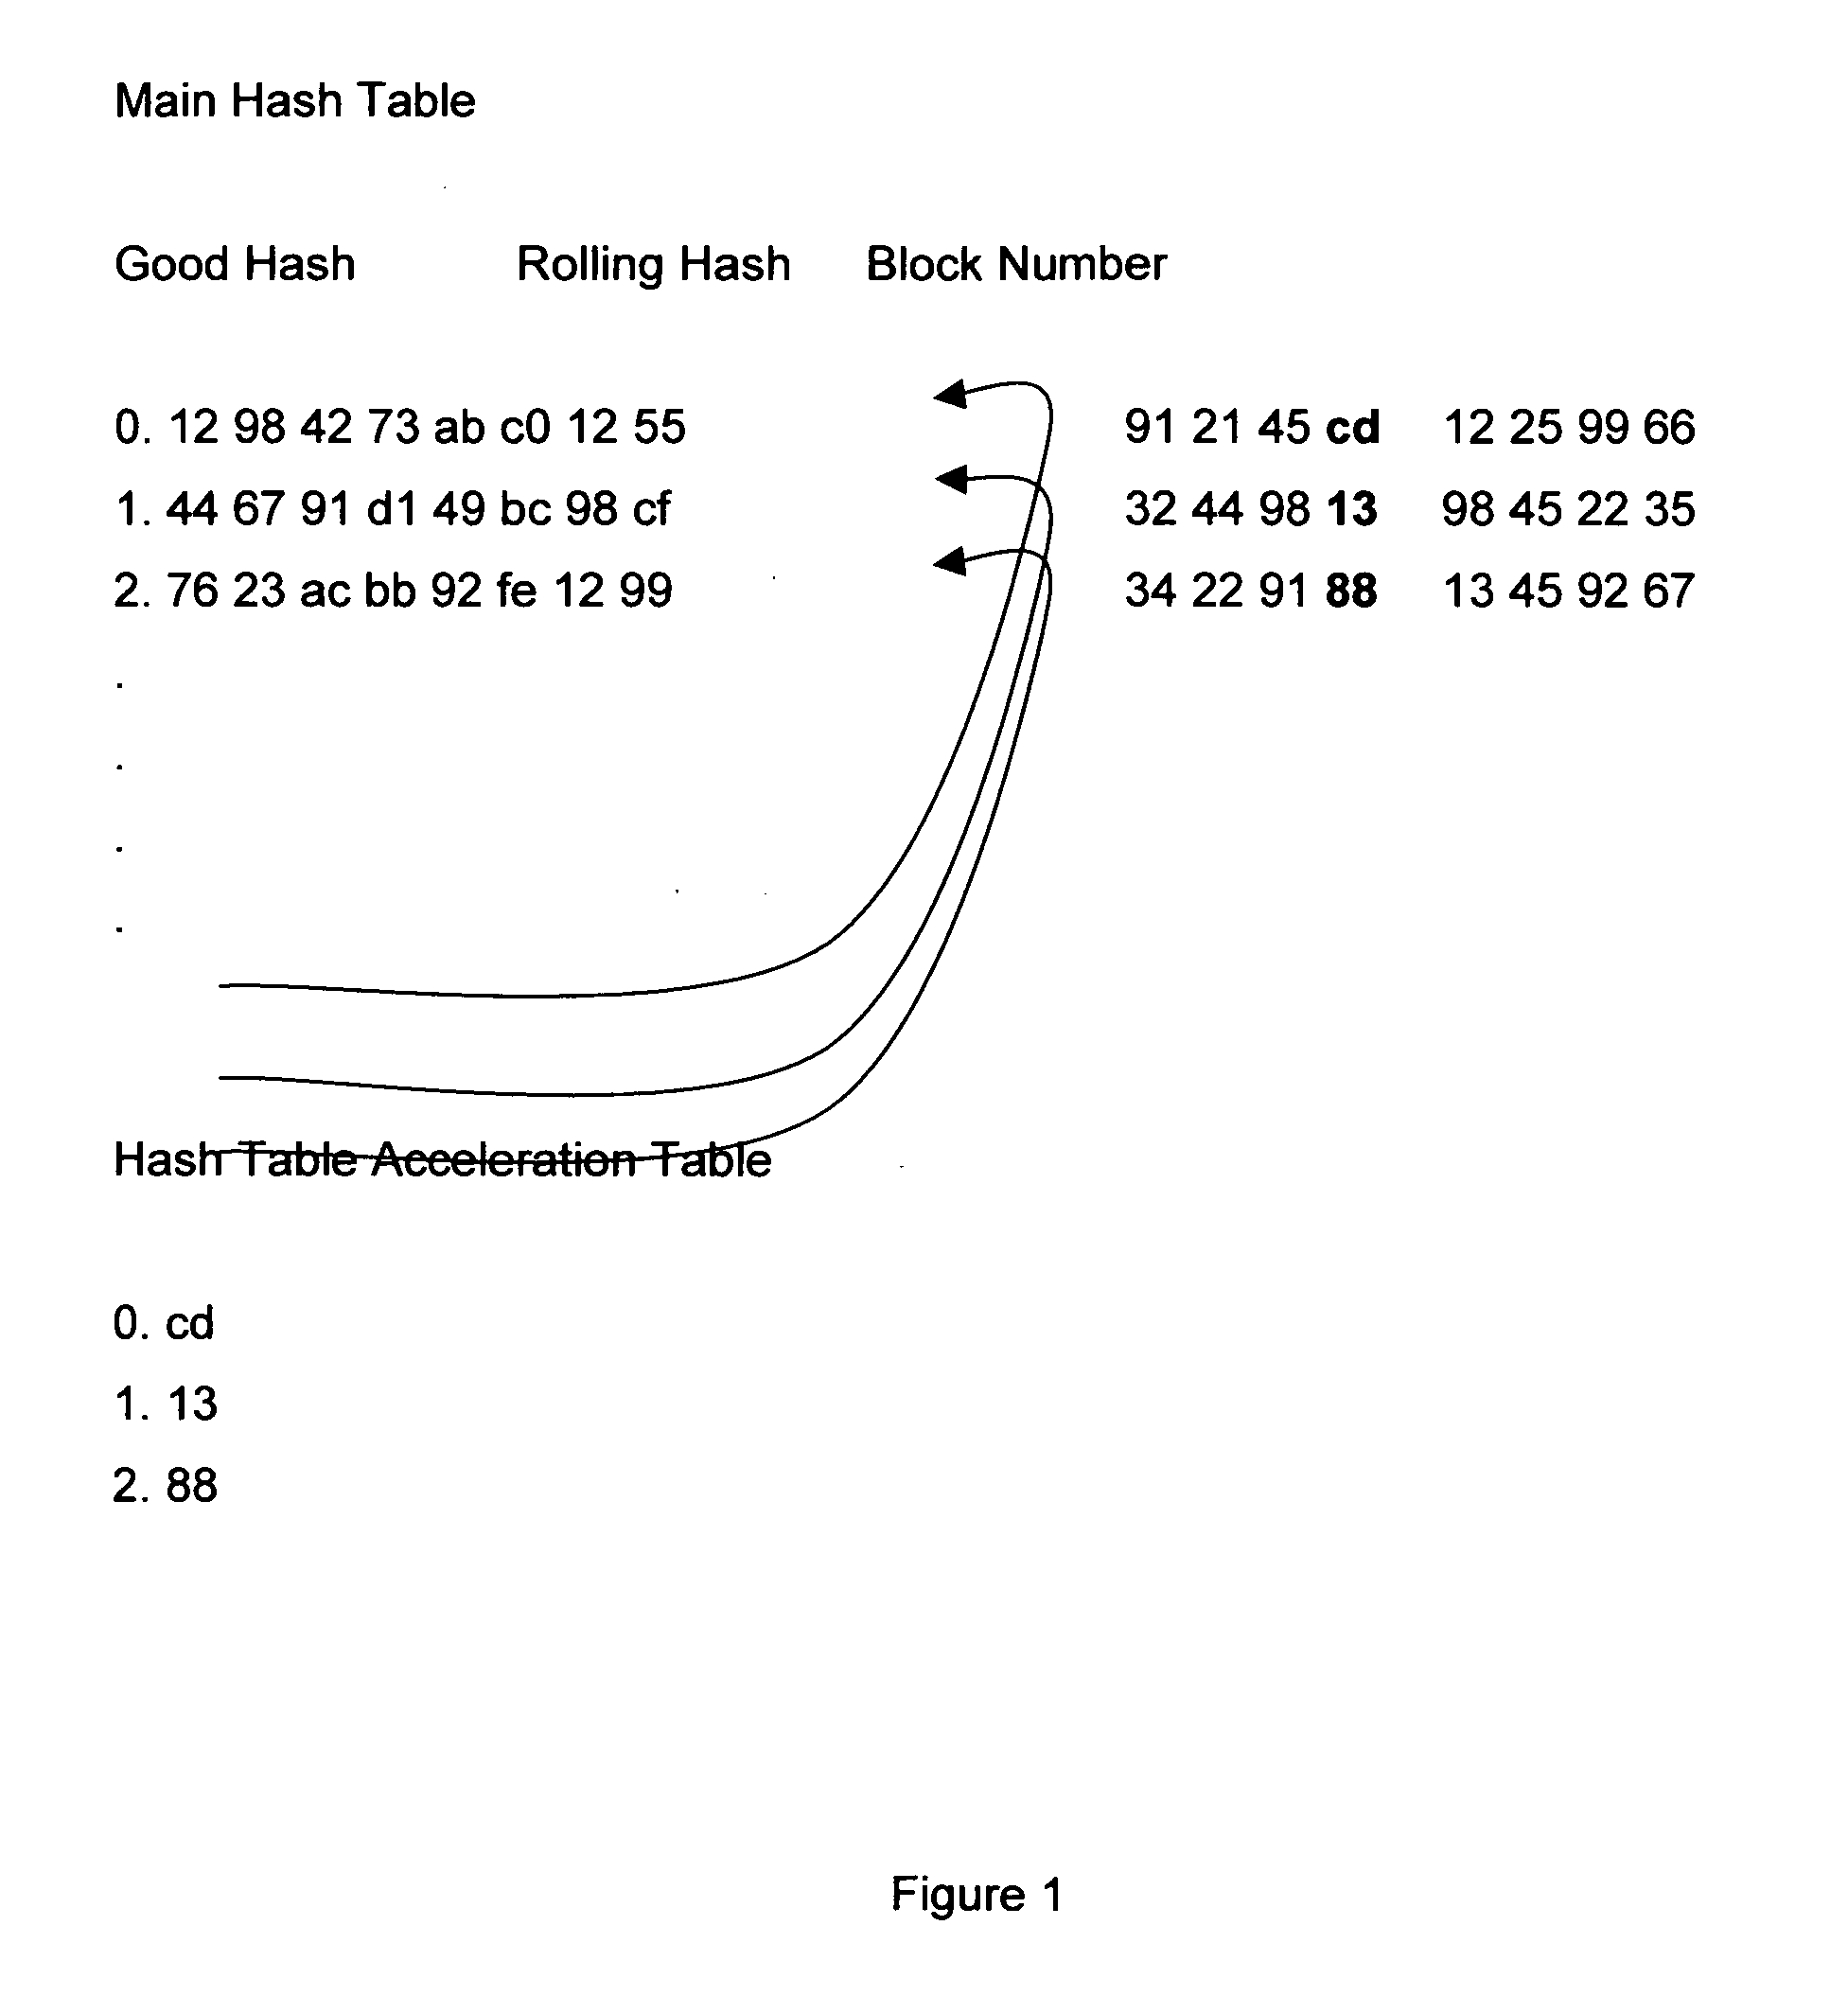 Method for reducing redundancy between two or more datasets